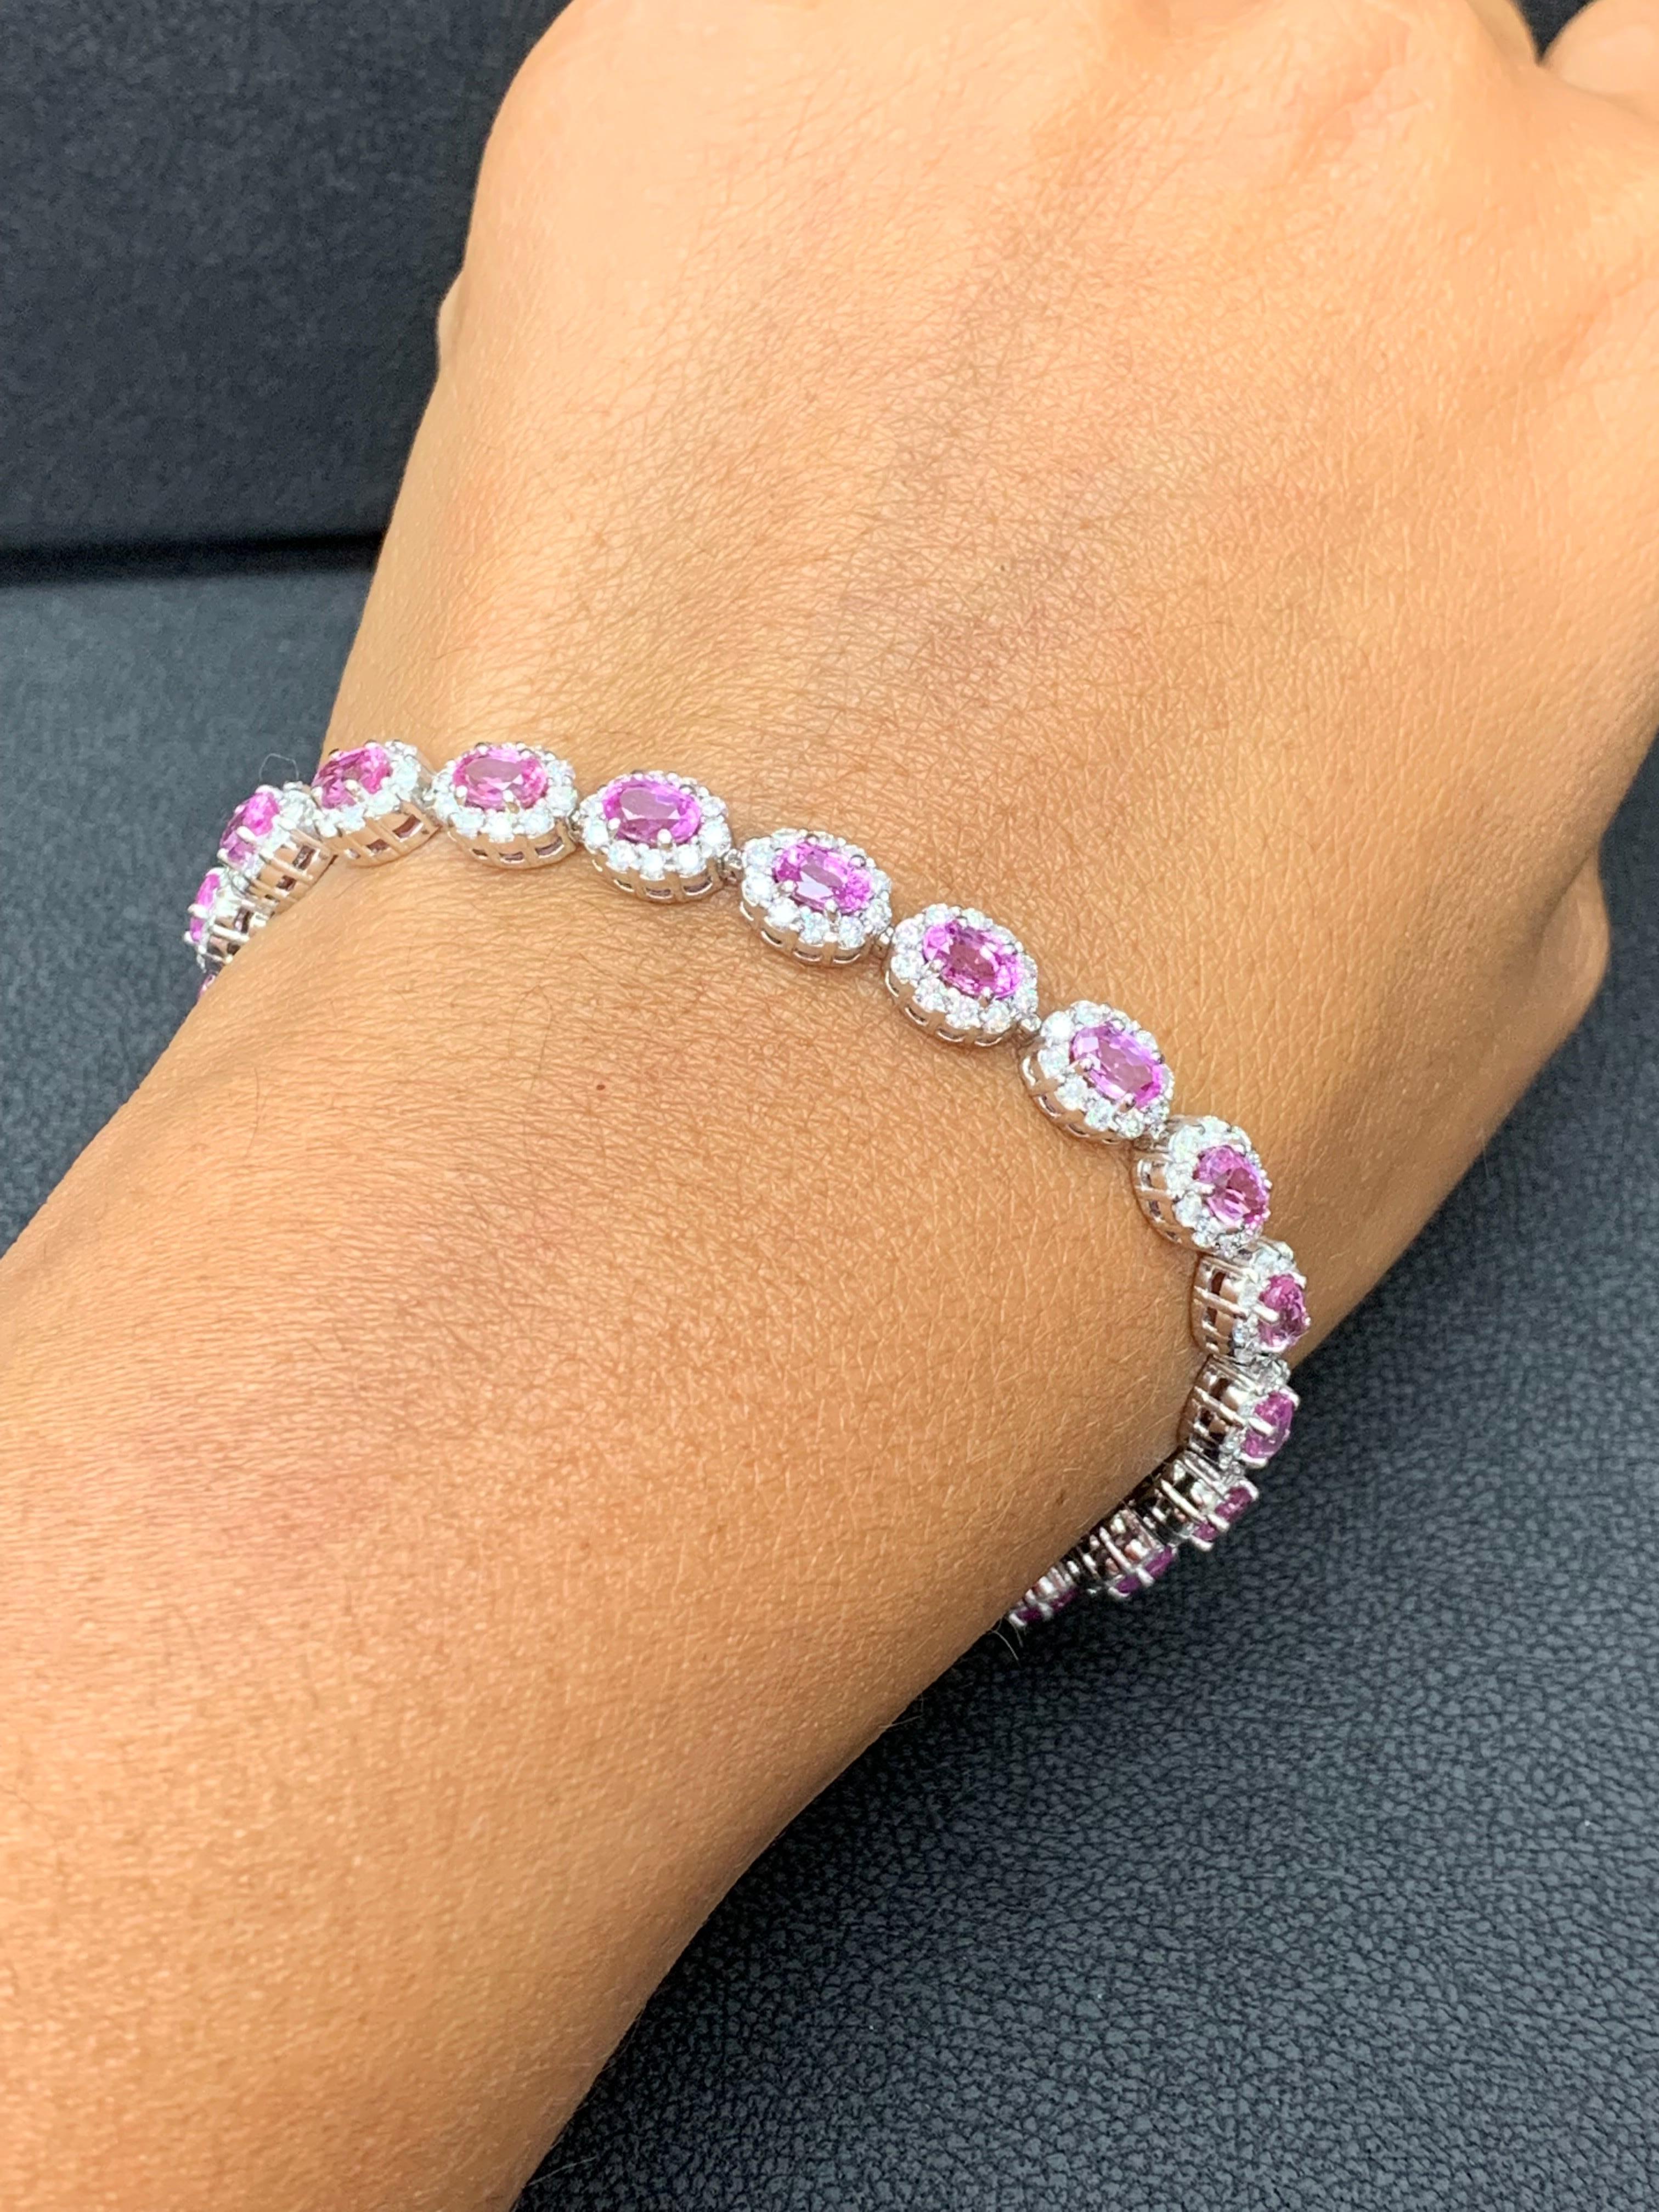 7.21 Carat Oval Cut Pink Sapphire and Diamond Halo Bracelet in 14K White Gold For Sale 1